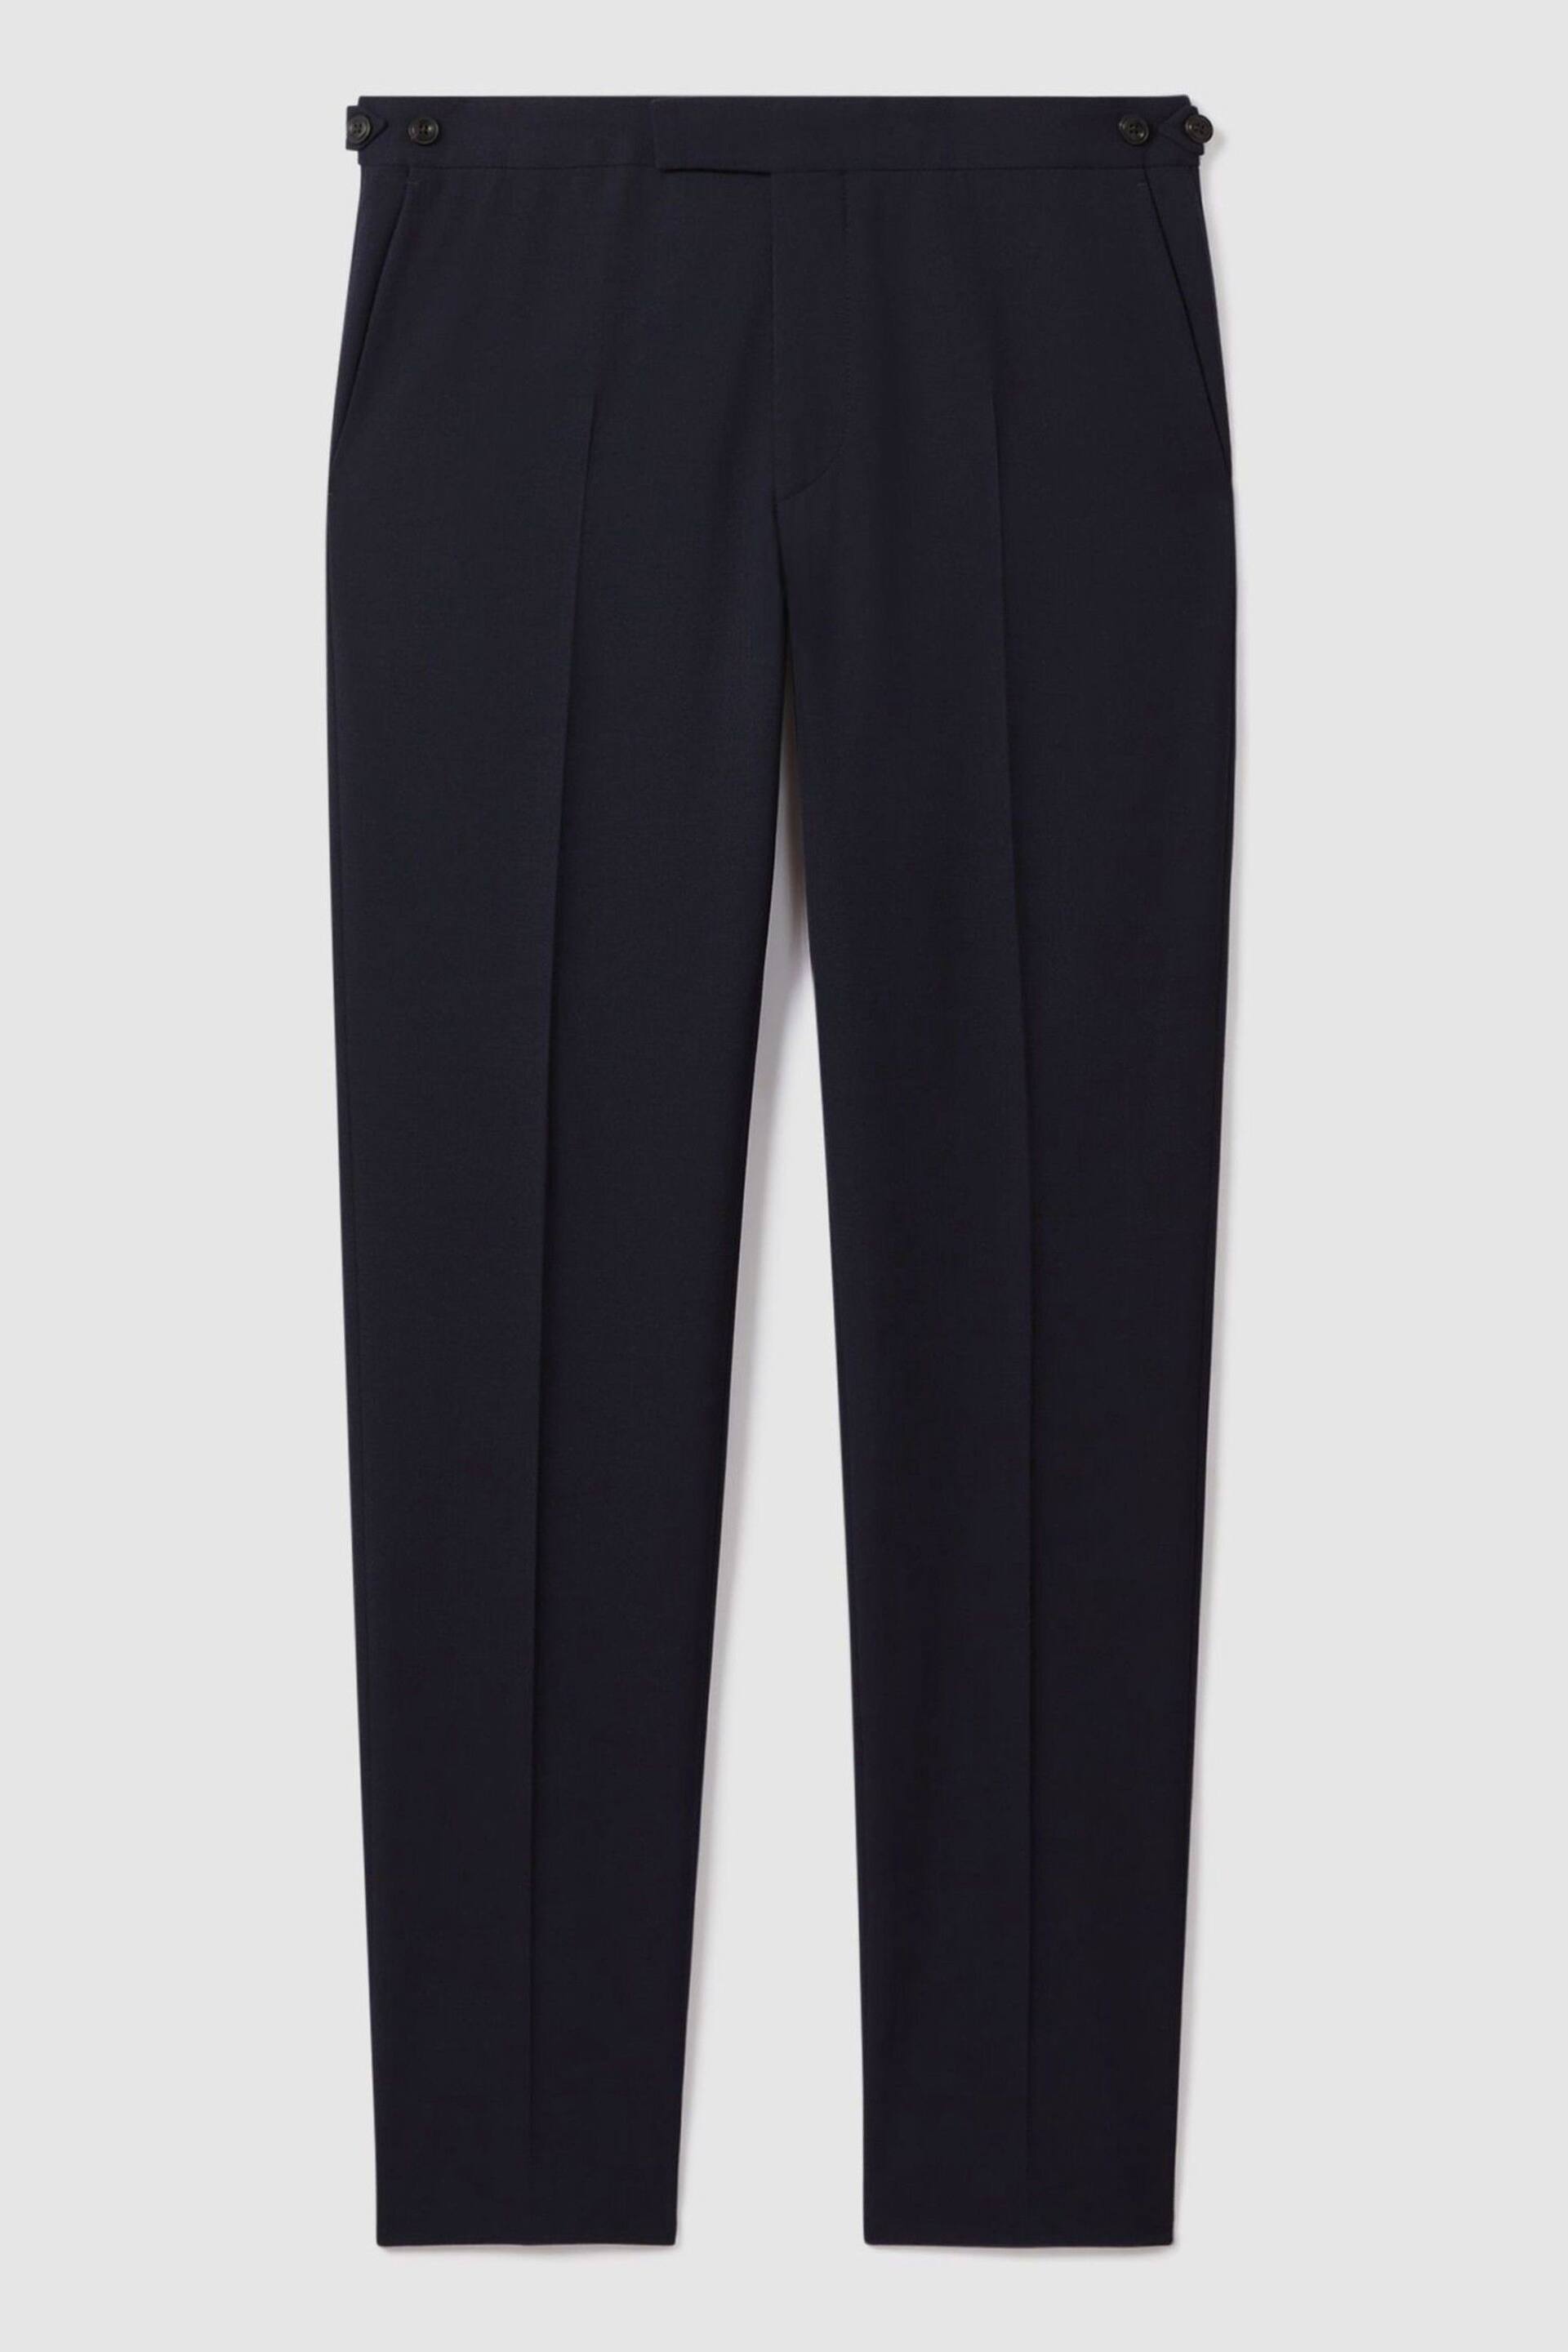 Reiss Navy Belmont Slim Fit Side Adjuster Trousers - Image 2 of 6